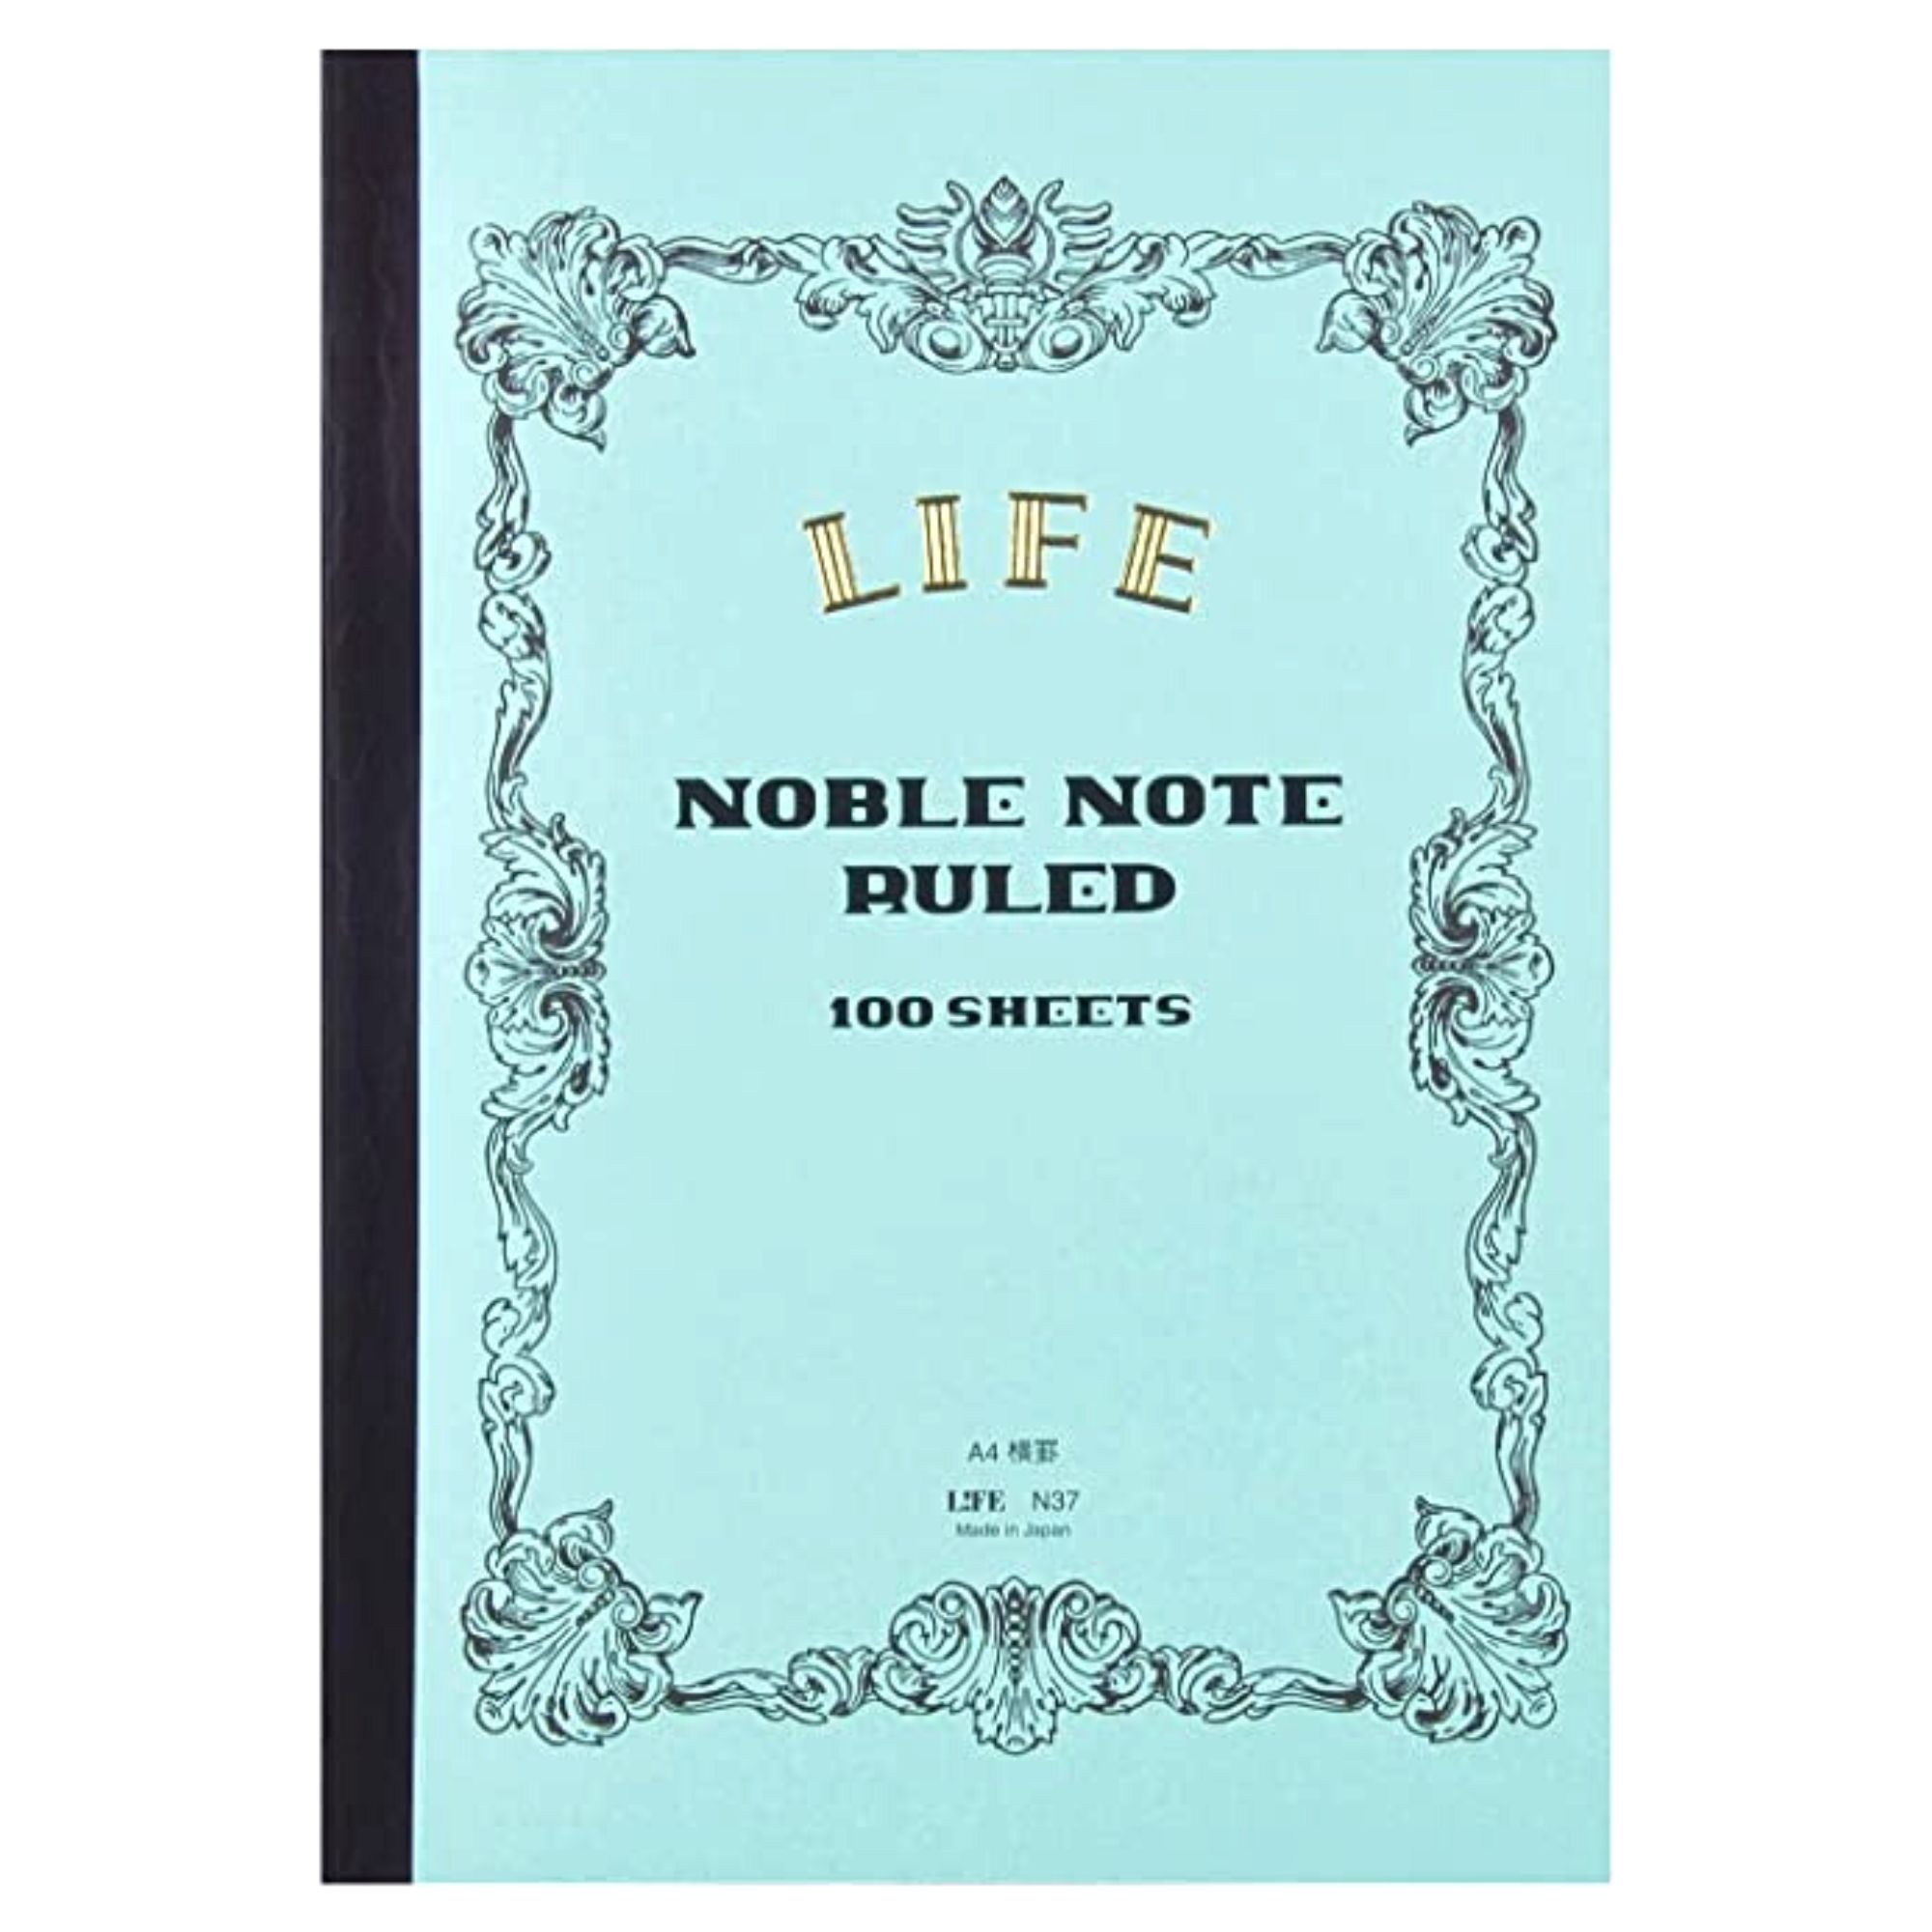 Life Noble Note Ruled Notebooks [Bound On Side]